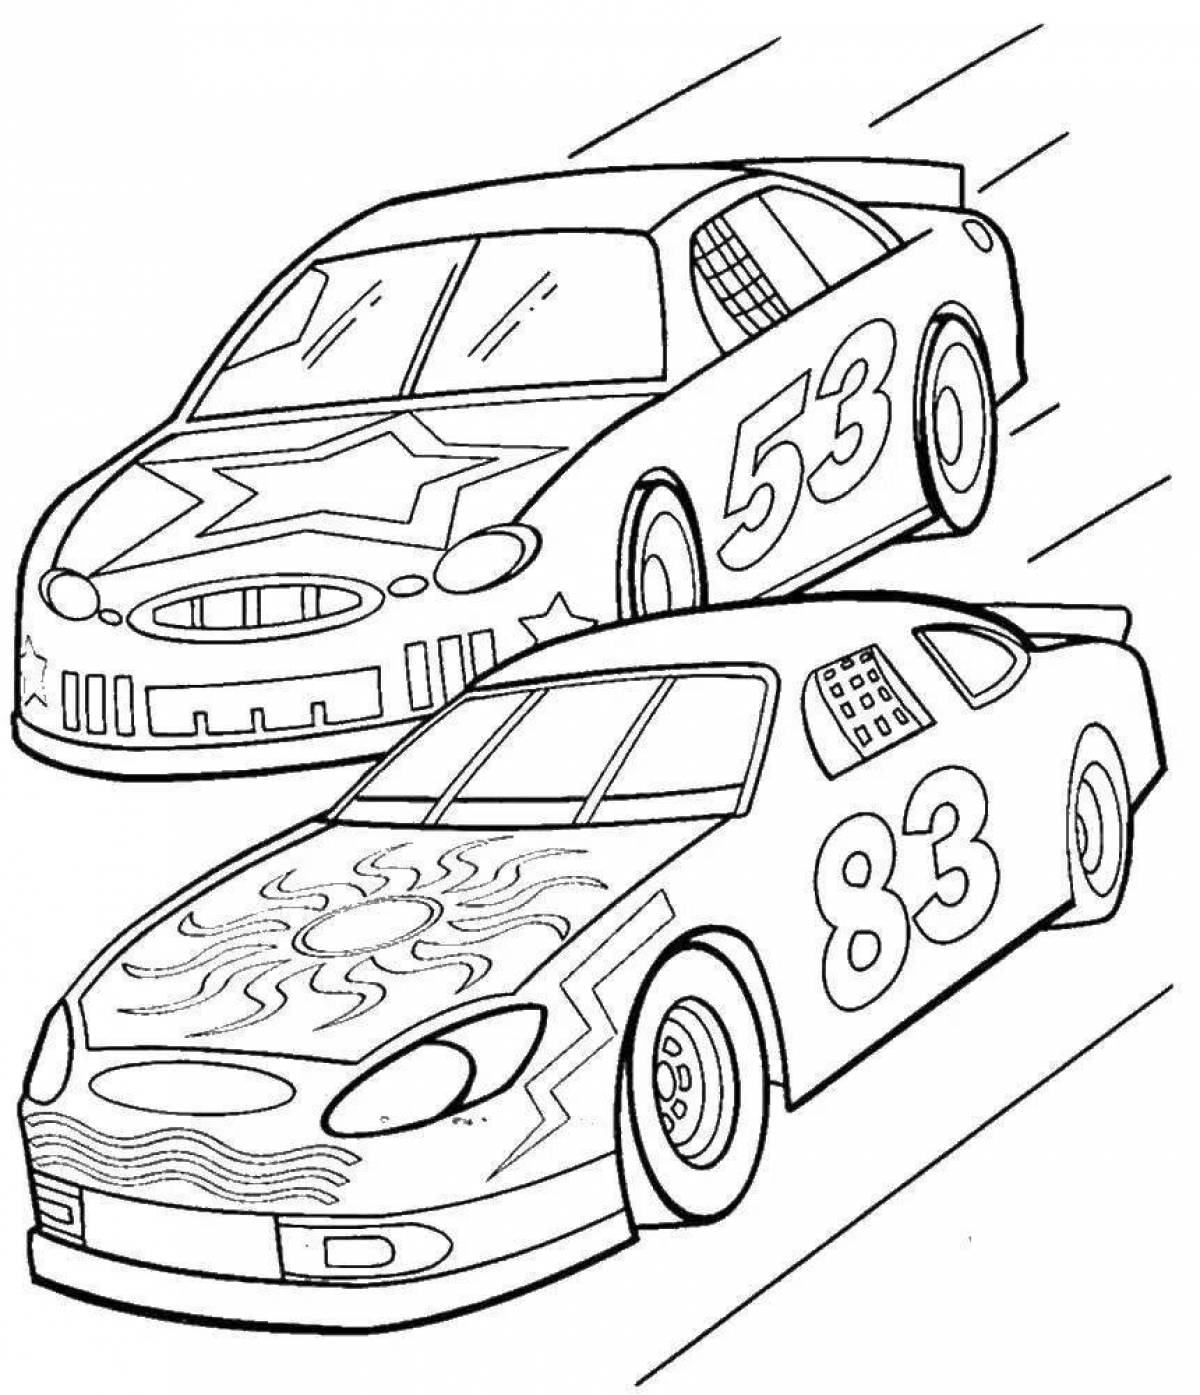 Image guard vehicle coloring page